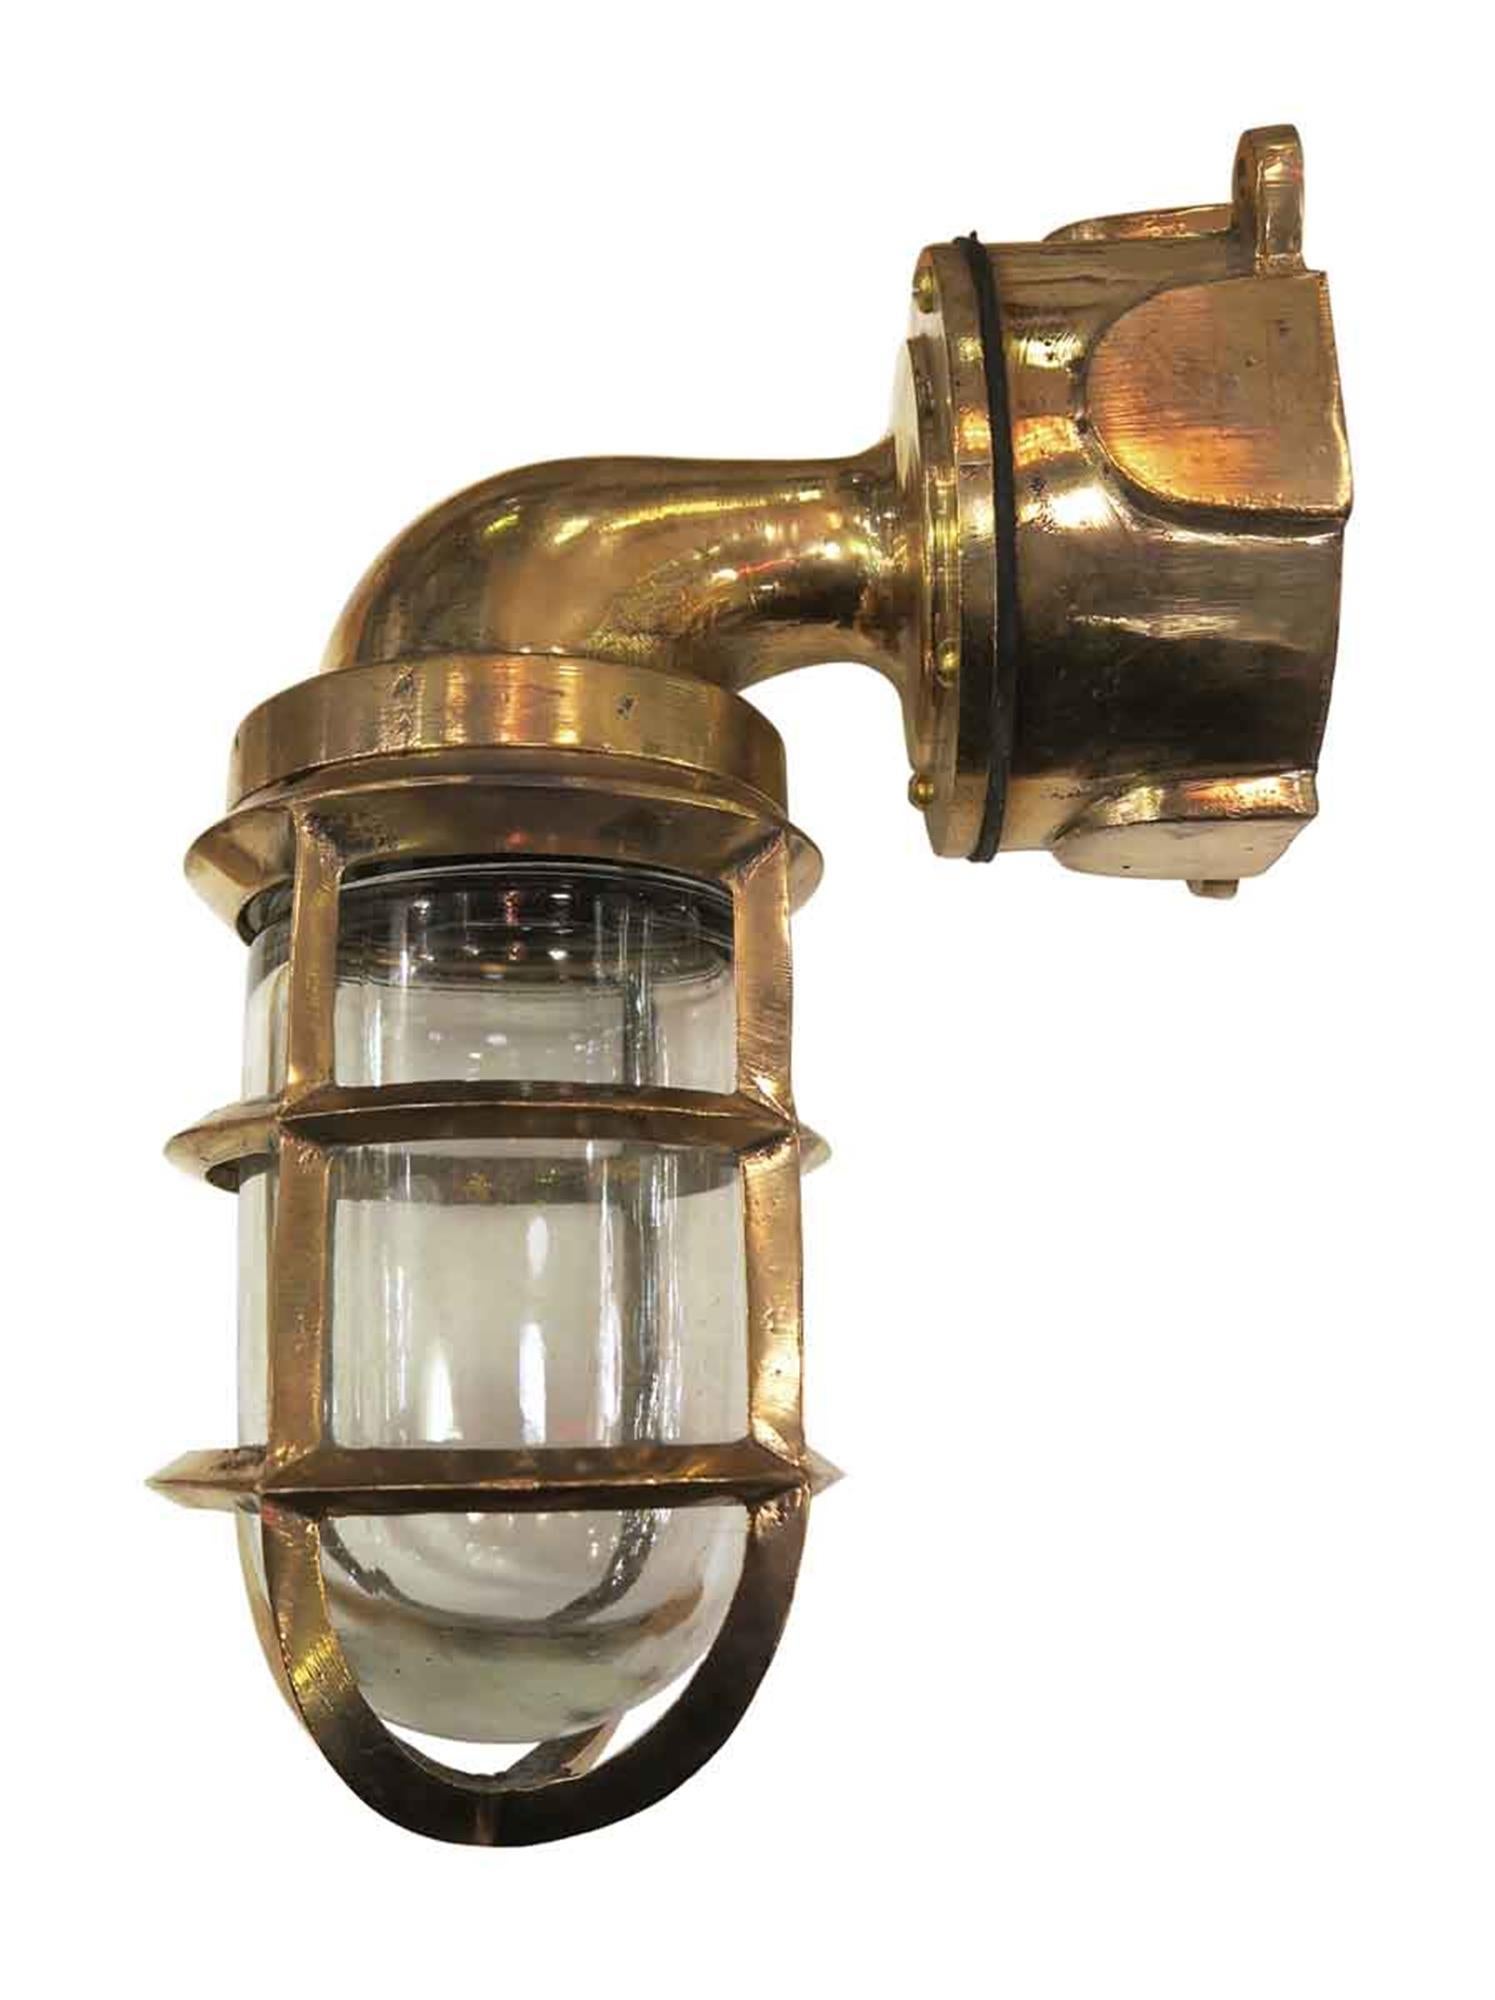 Heavy duty polished brass nautical ship sconce. Industrial Design. Quantity available at time of posting. Priced each. This can be seen at our 302 bowery location in Manhattan.